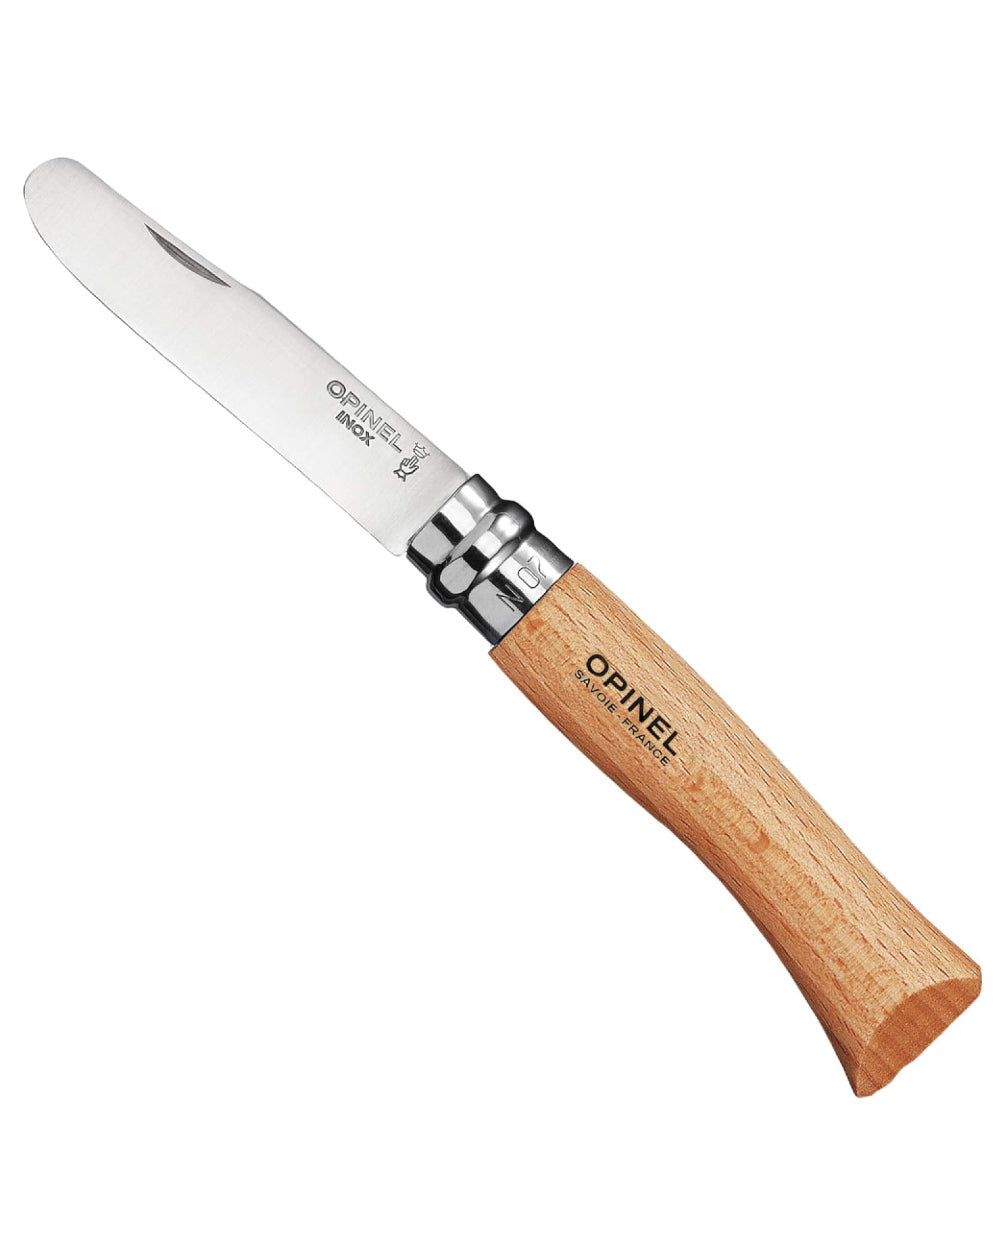 Opinel No. 7 Round Ended Knife - Natural On A White Background